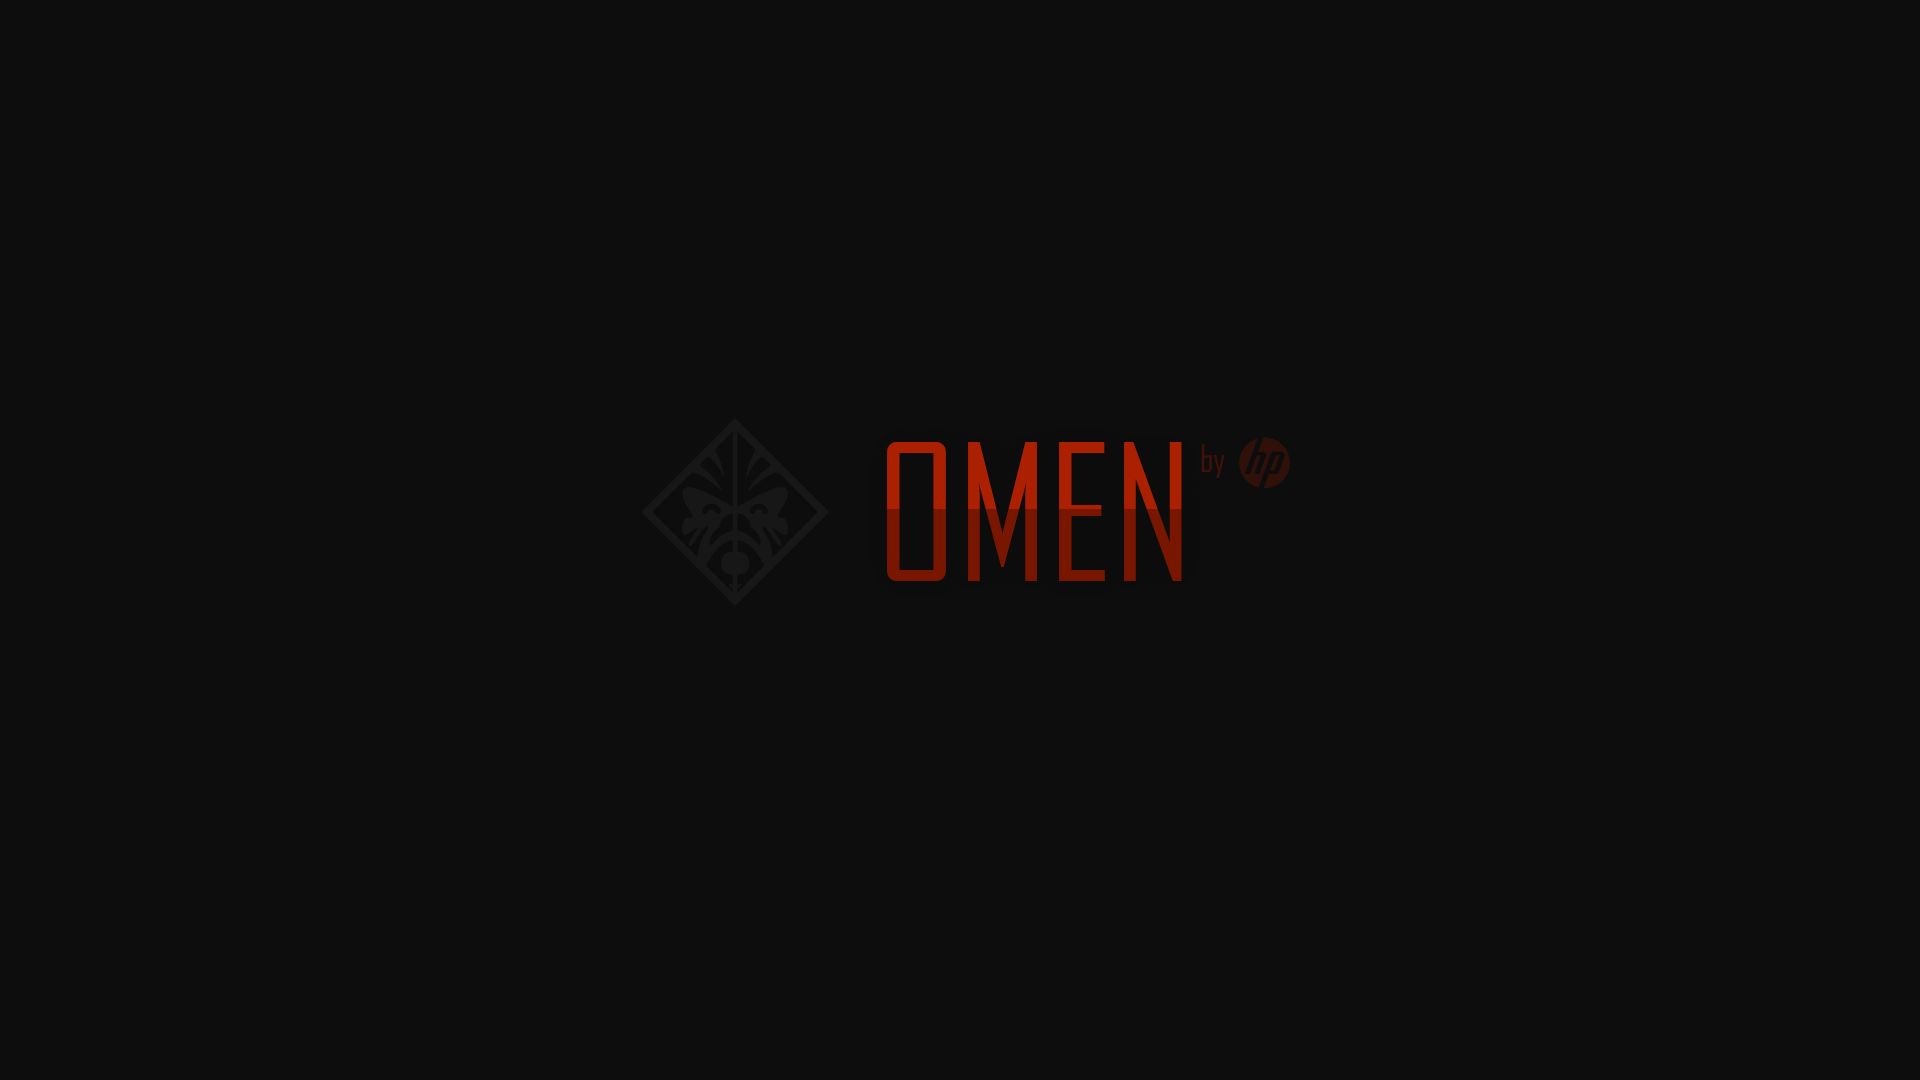 Download Omen wallpaper by fakedesigner  e7  Free on ZEDGE now Browse  millions of popular game  Gaming wallpapers Retro games wallpaper  Gaming wallpapers hd